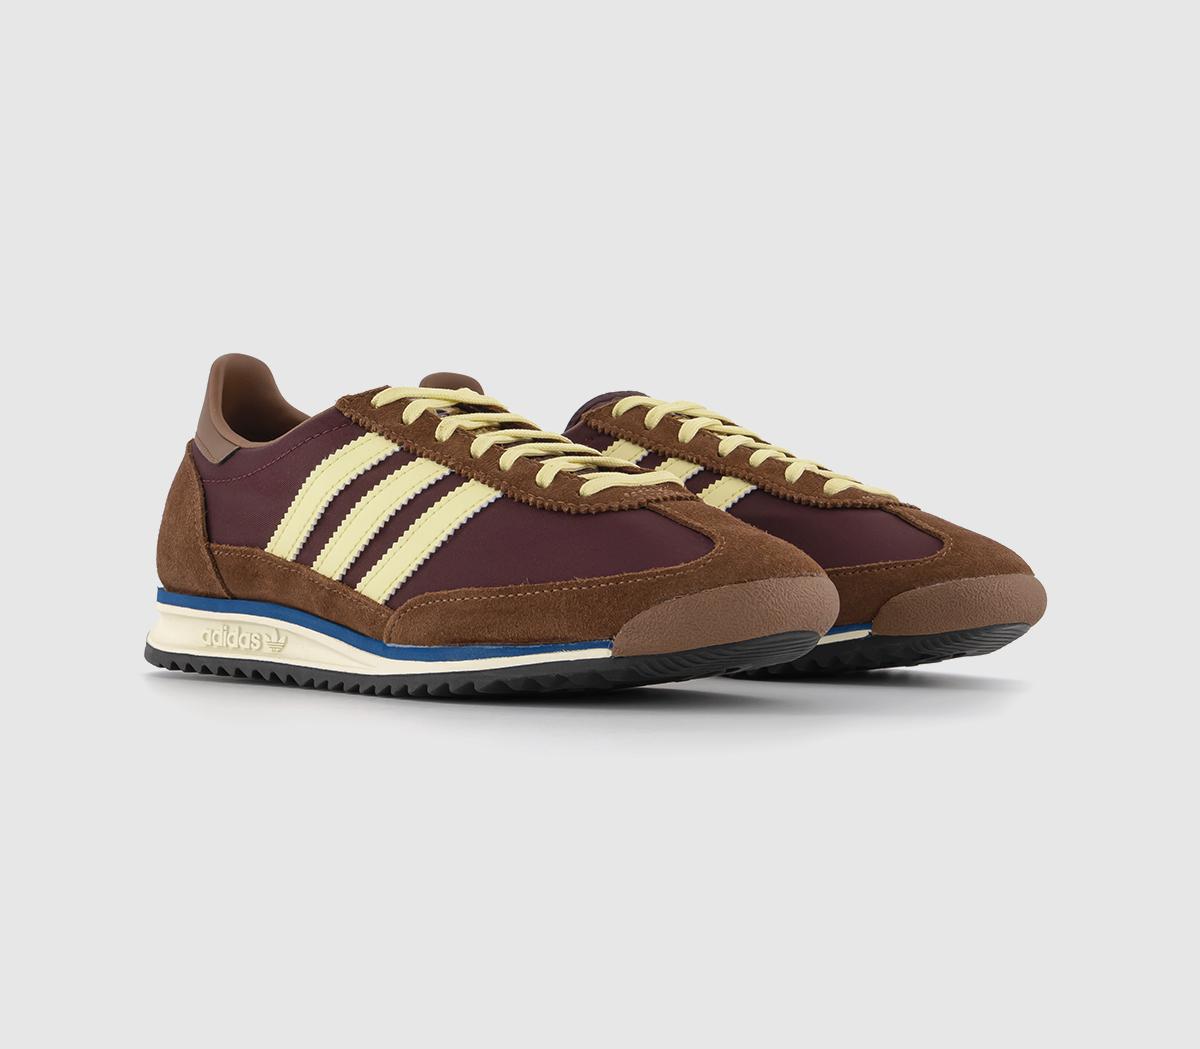 Adidas Womens SL 72 Trainers Maroon Almost Yellow Preloved Brown, 9